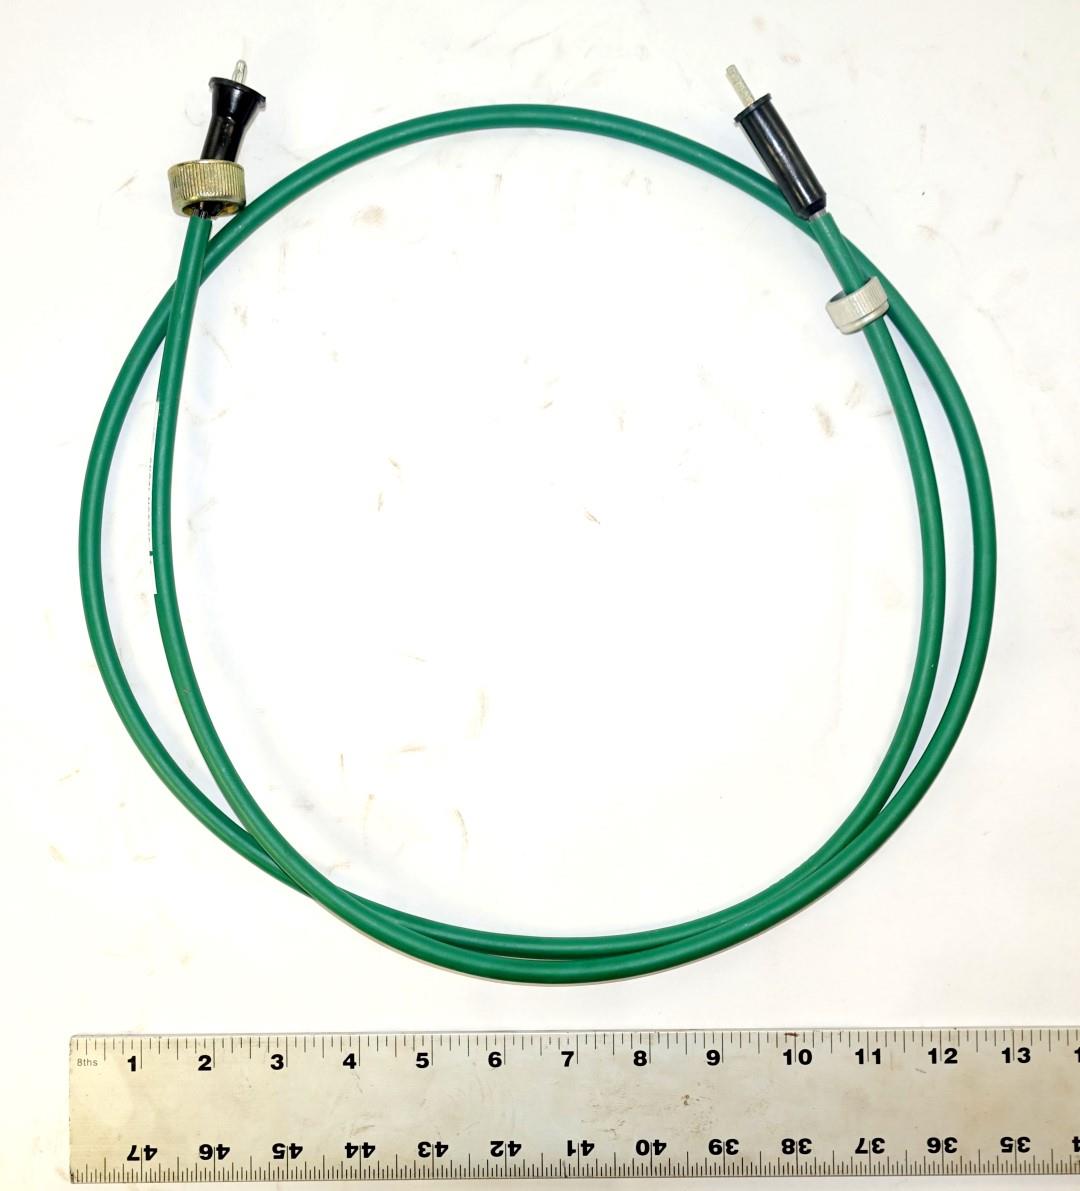 HEM-242 | 6680-01-017-8566 Speedometer Cable for M746 Tractor NOS (4).JPG